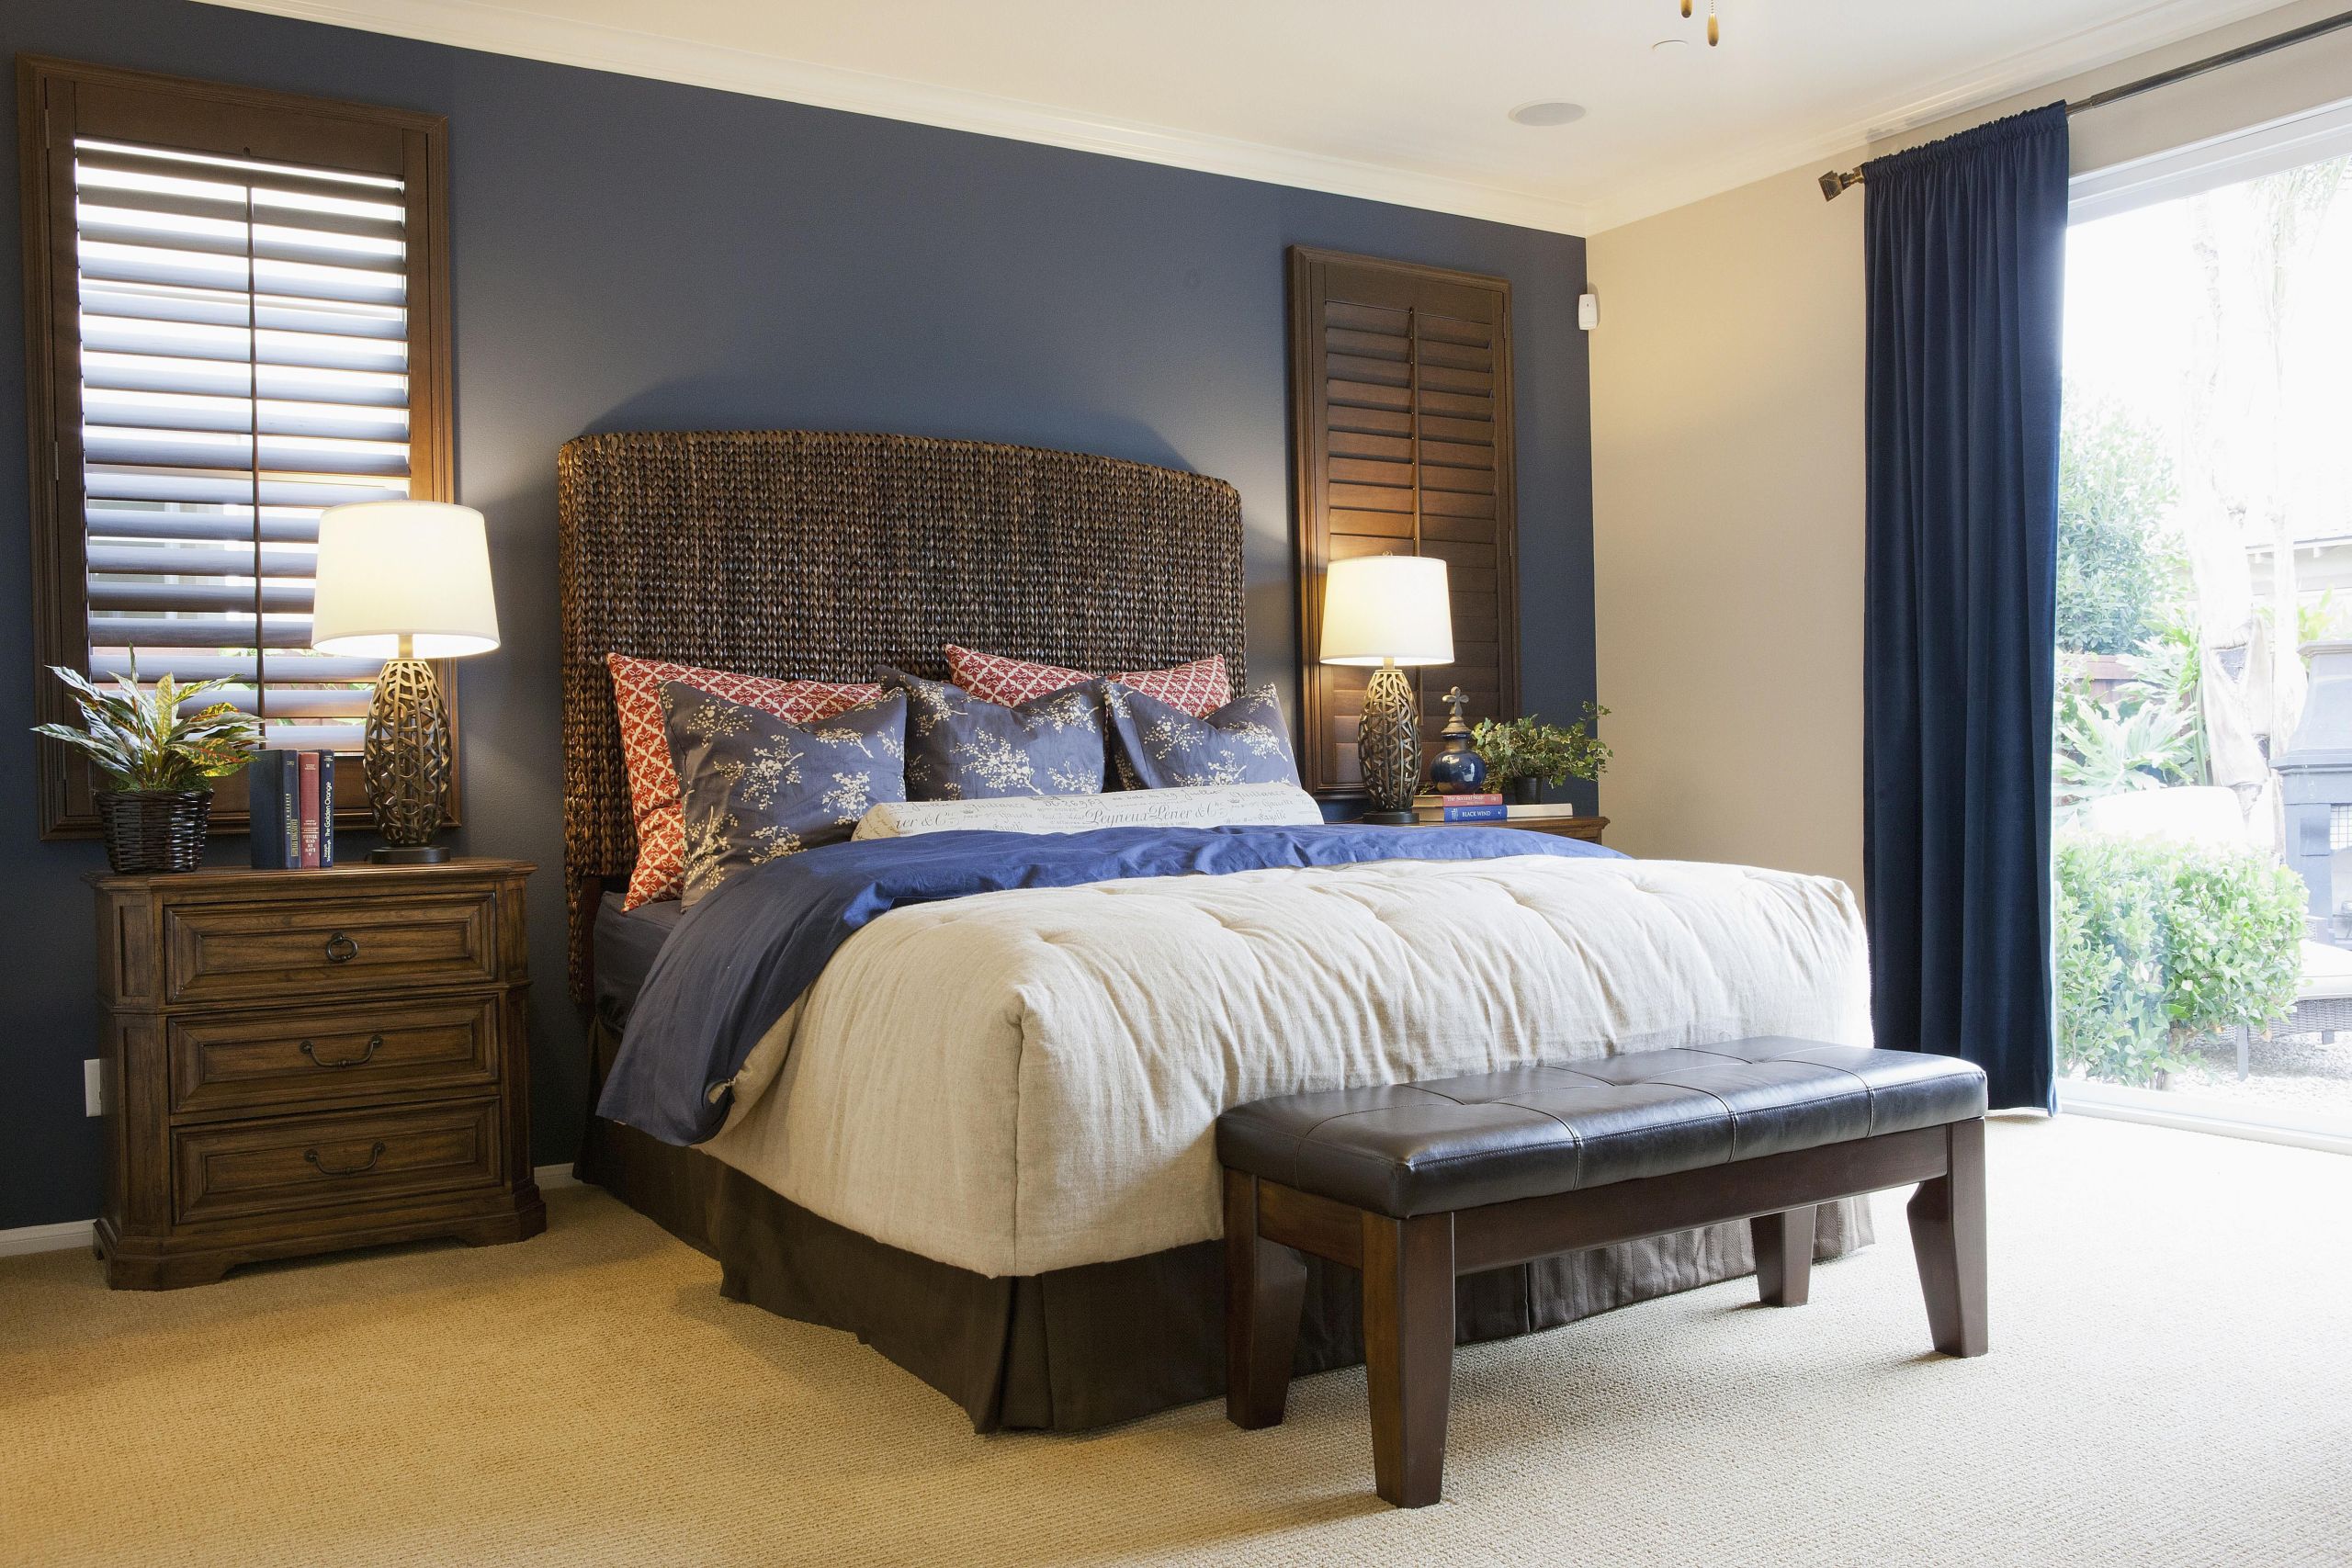 Accent Wall Ideas Bedroom
 How to Choose an Accent Wall and Color in a Bedroom